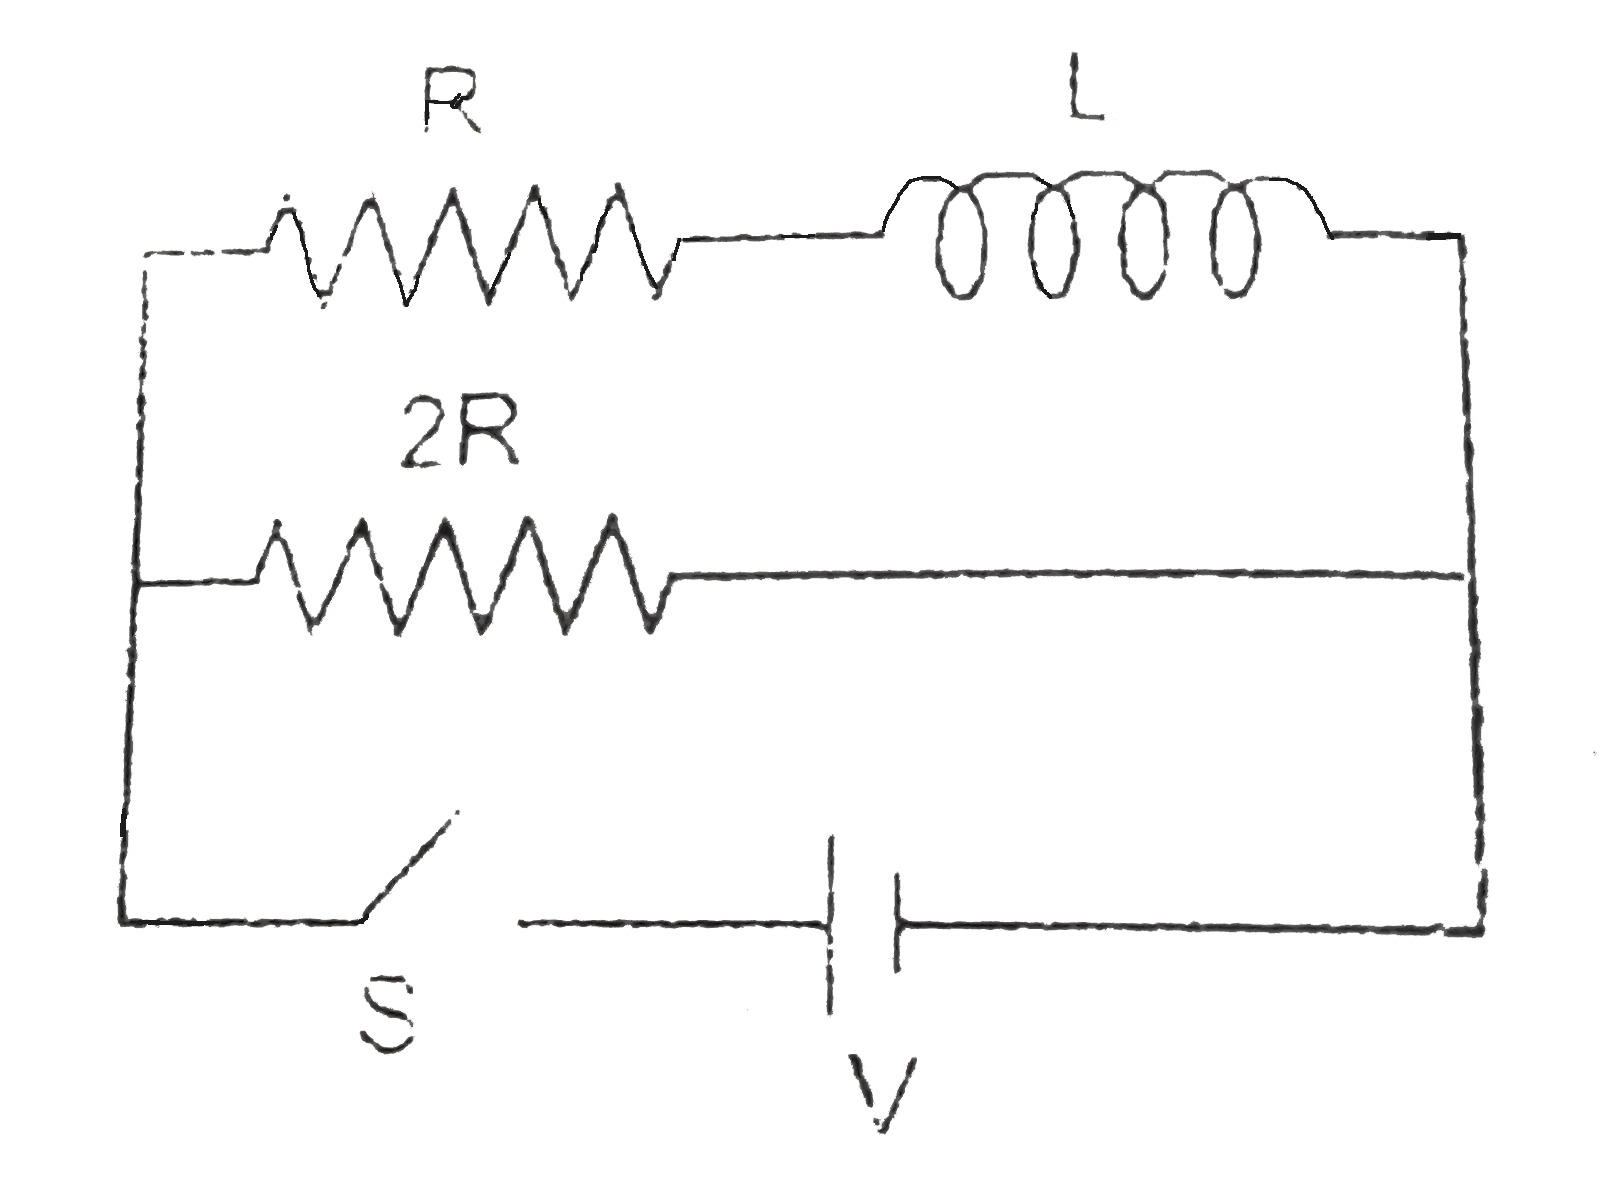 Consider a L-R circuit shown in figure. There is no current in circuit switch S is closed at t = 0, time instant when current in inductor is equal to current in resistor 2R will be :